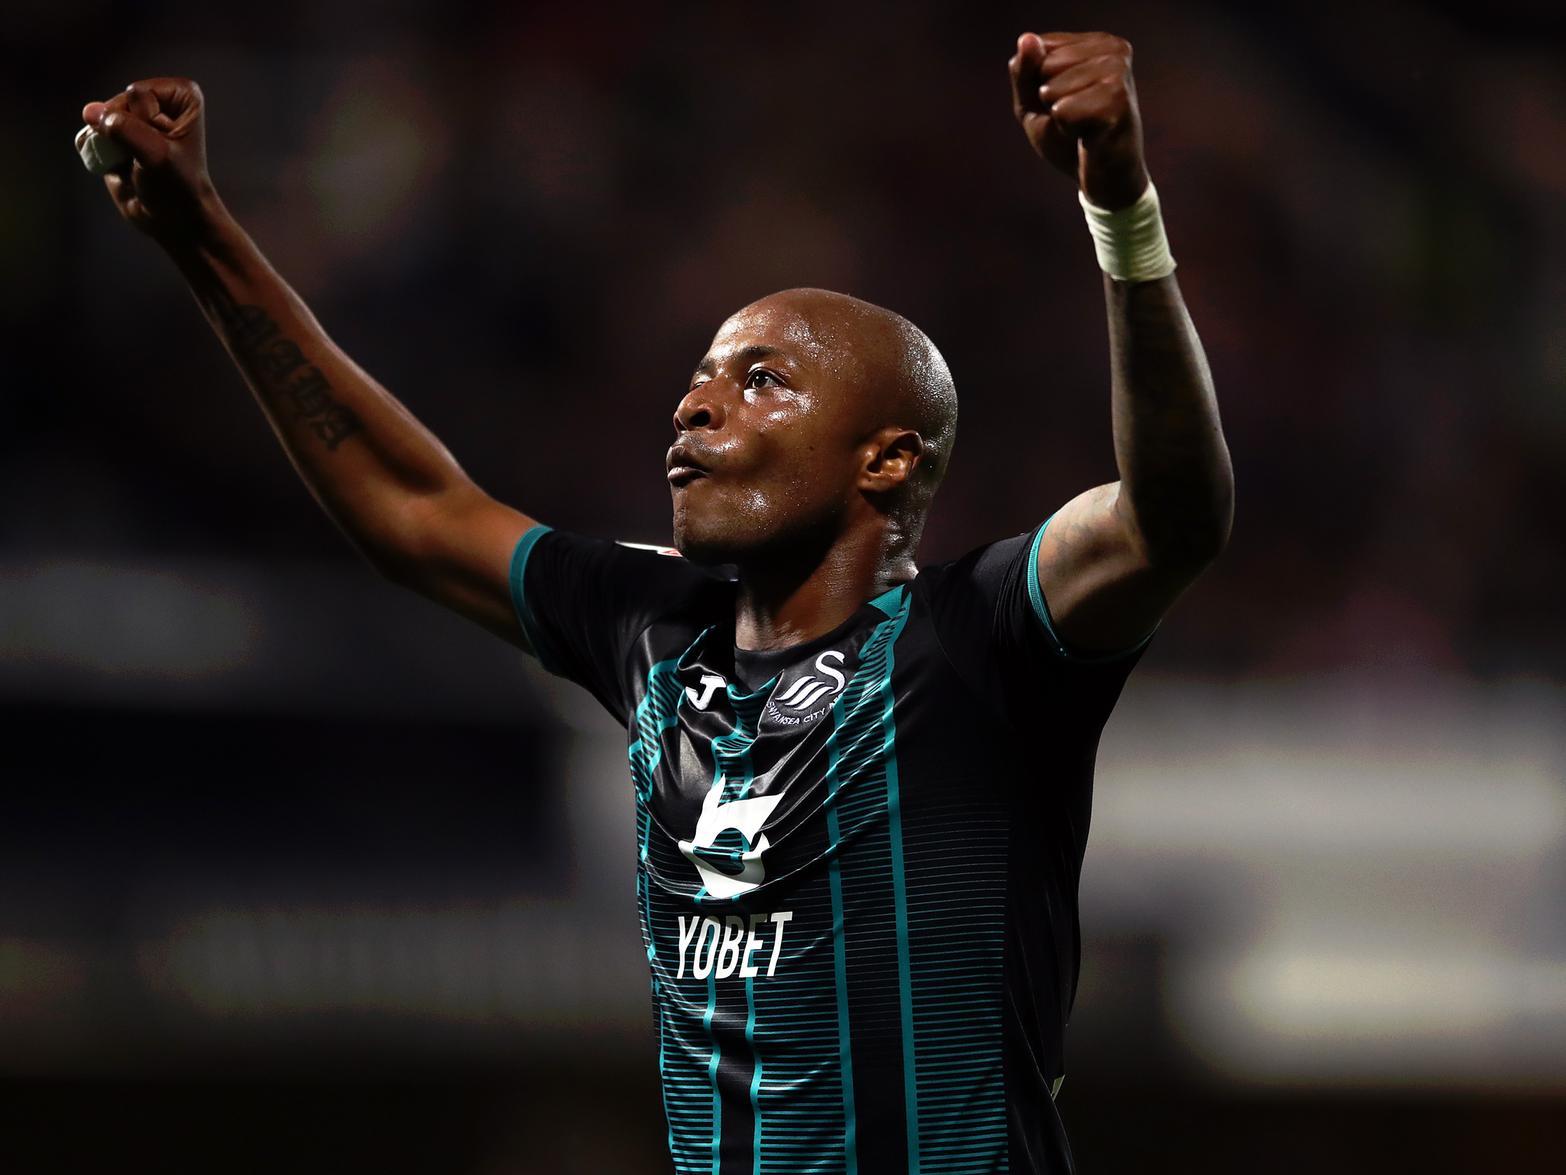 Leeds United are rumoured to be lining up a move for Swansea City striker Andre Ayew, as they look to boost their attacking threat in the January transfer window. (Sport Witness)